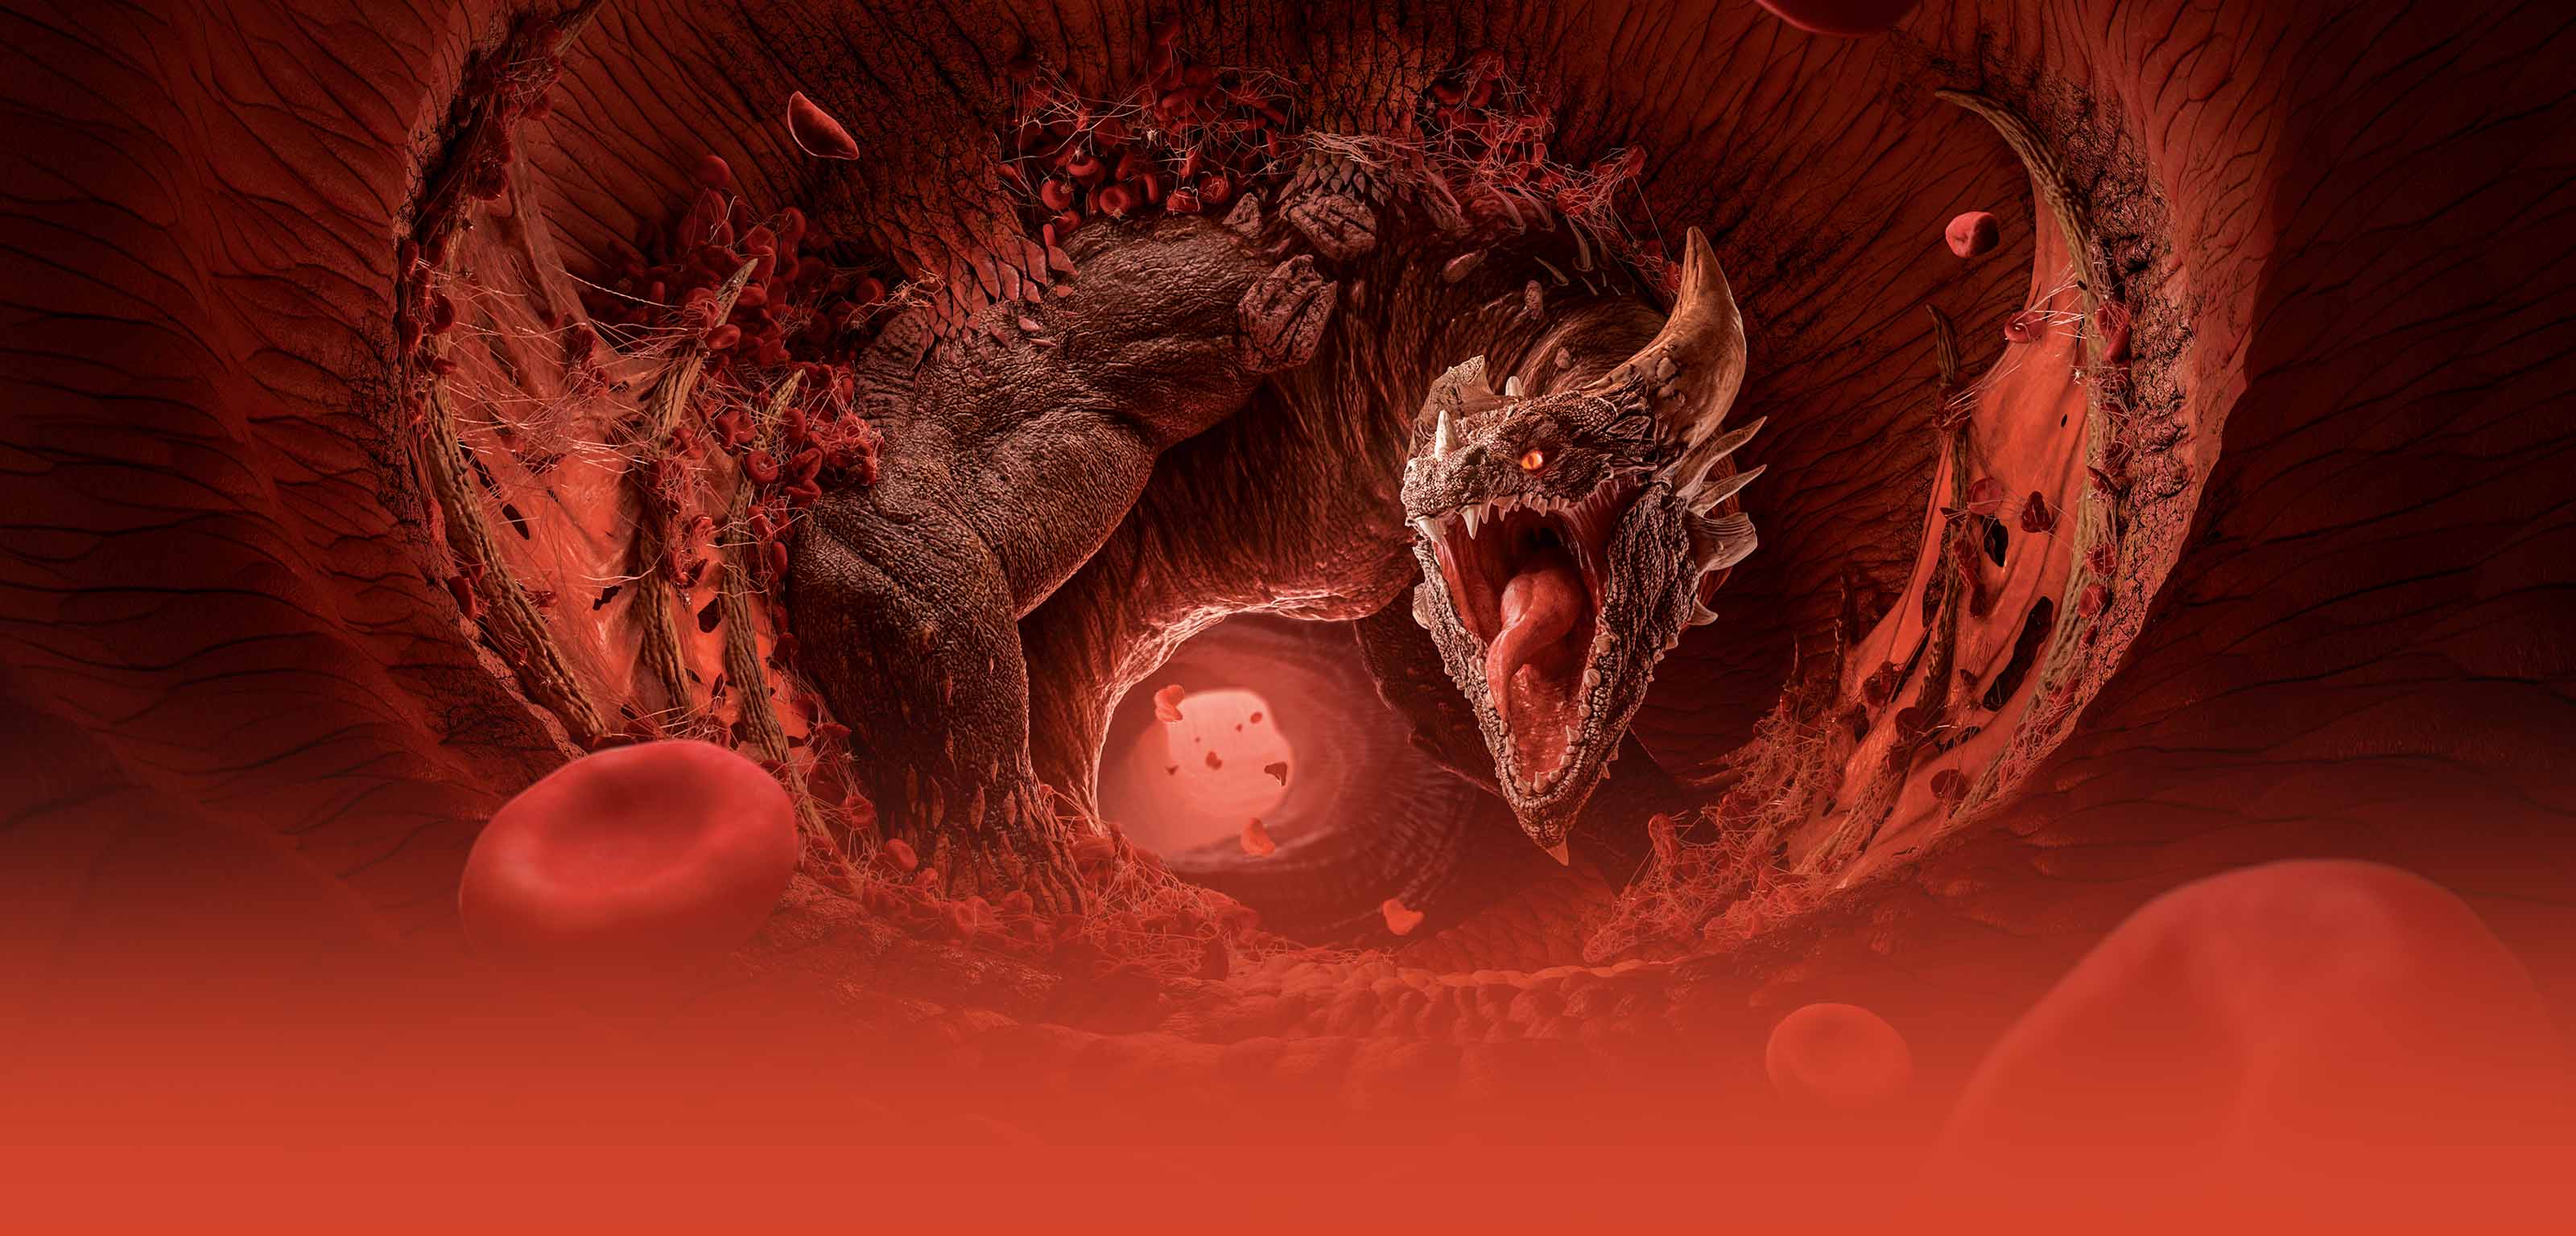 HSCT-TMA ad campaign for OMEROs. Image of a red horned dragon mouth wide open showing its teeth